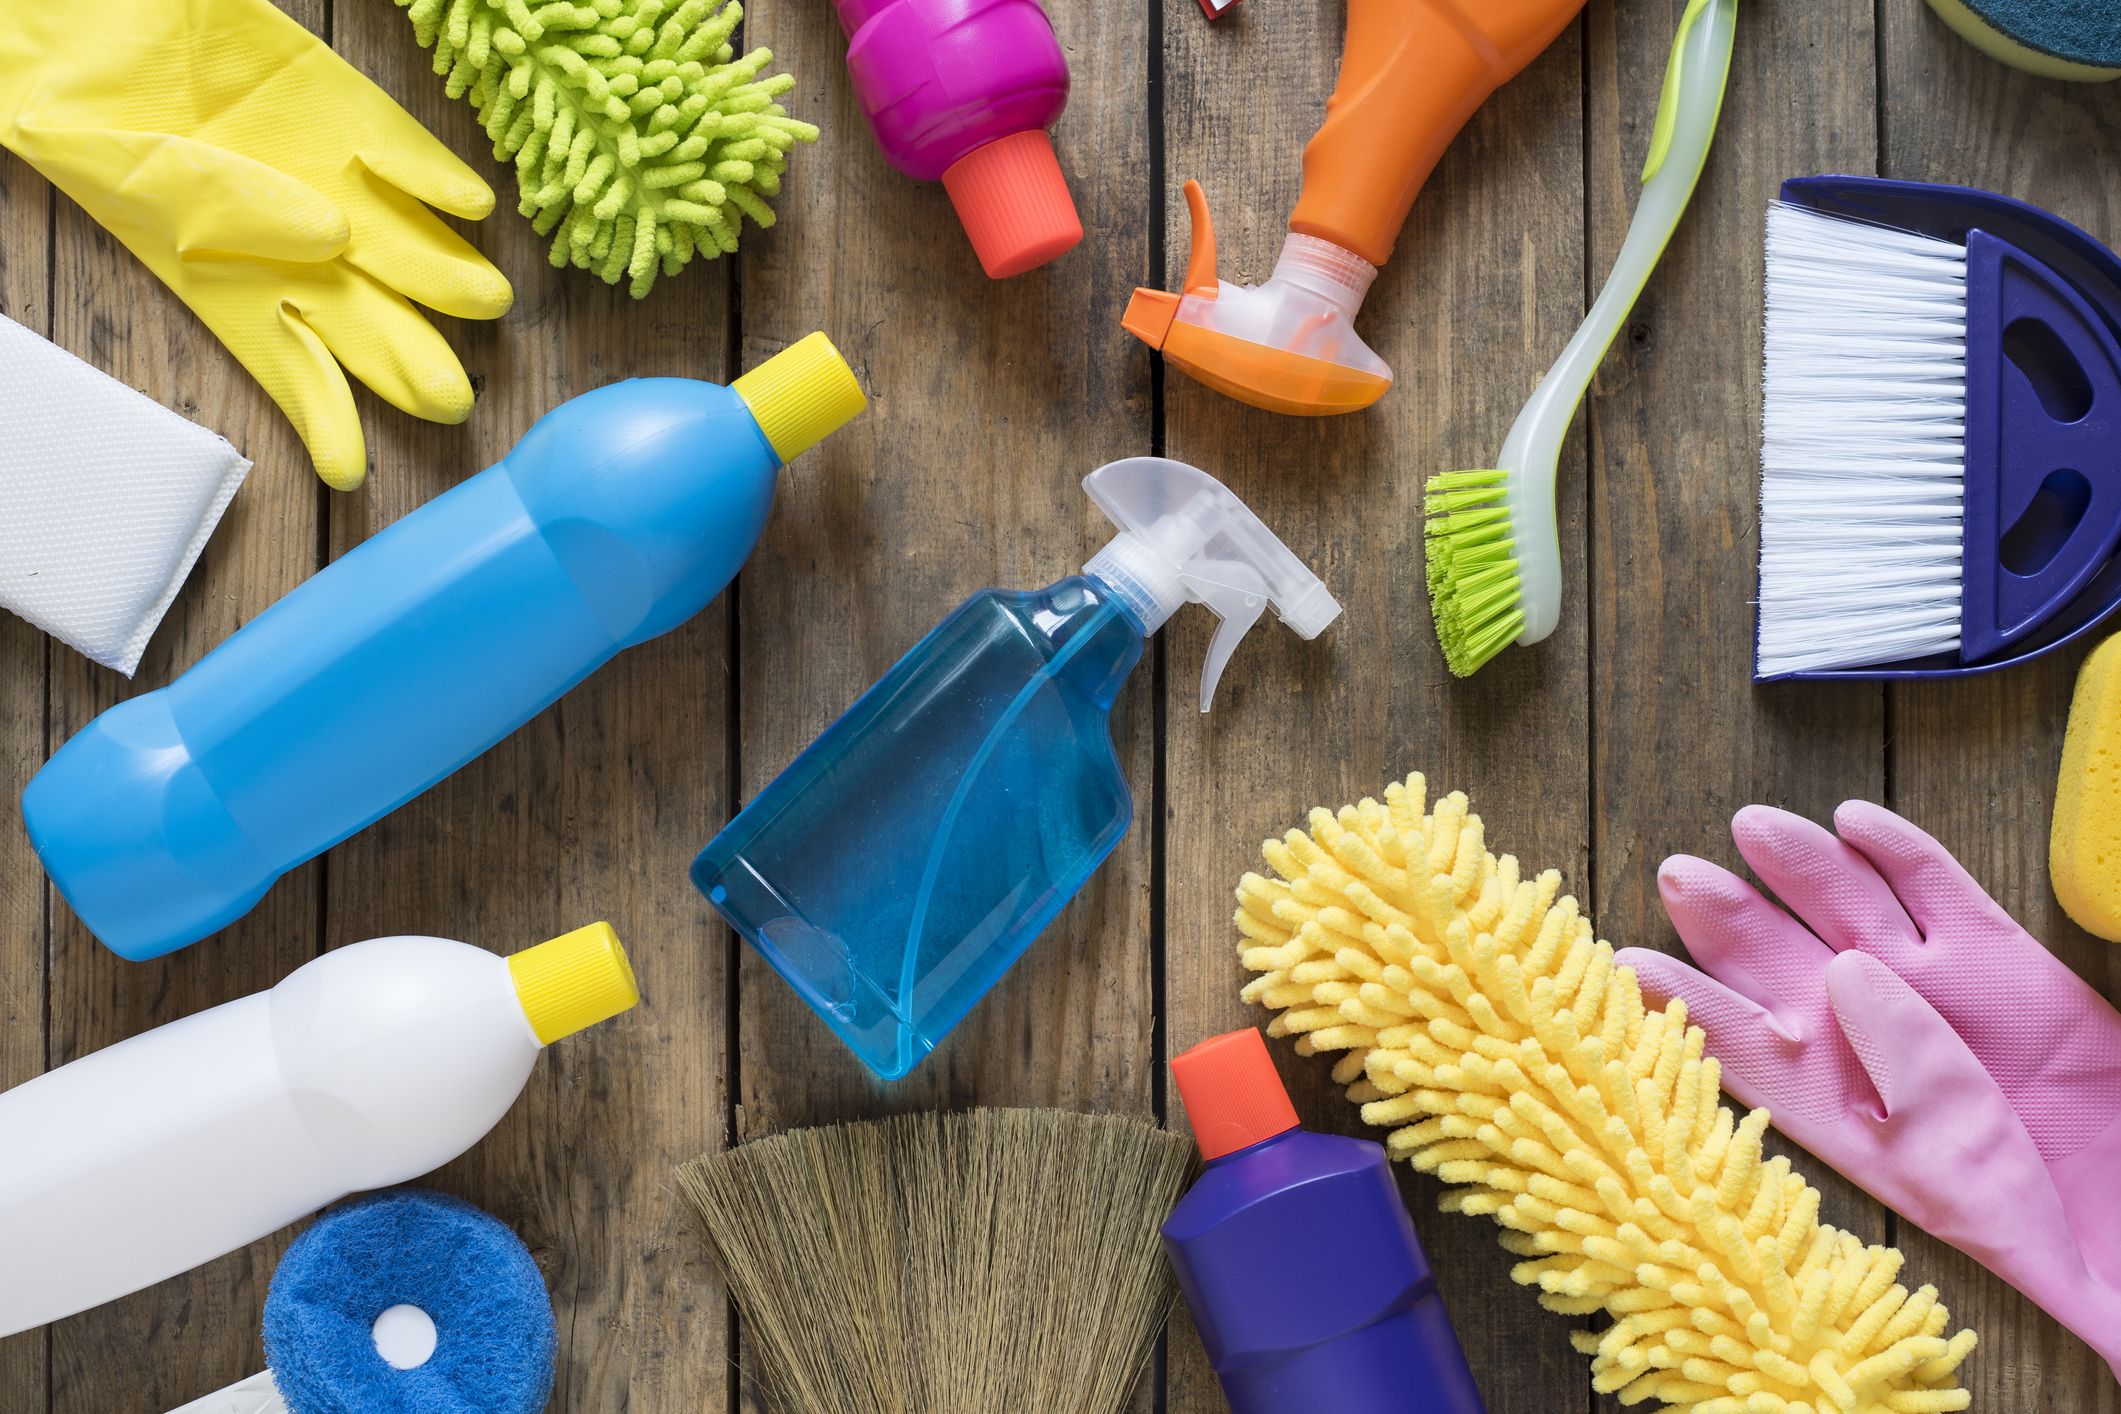 17 Disinfecting and Cleaning Supplies 